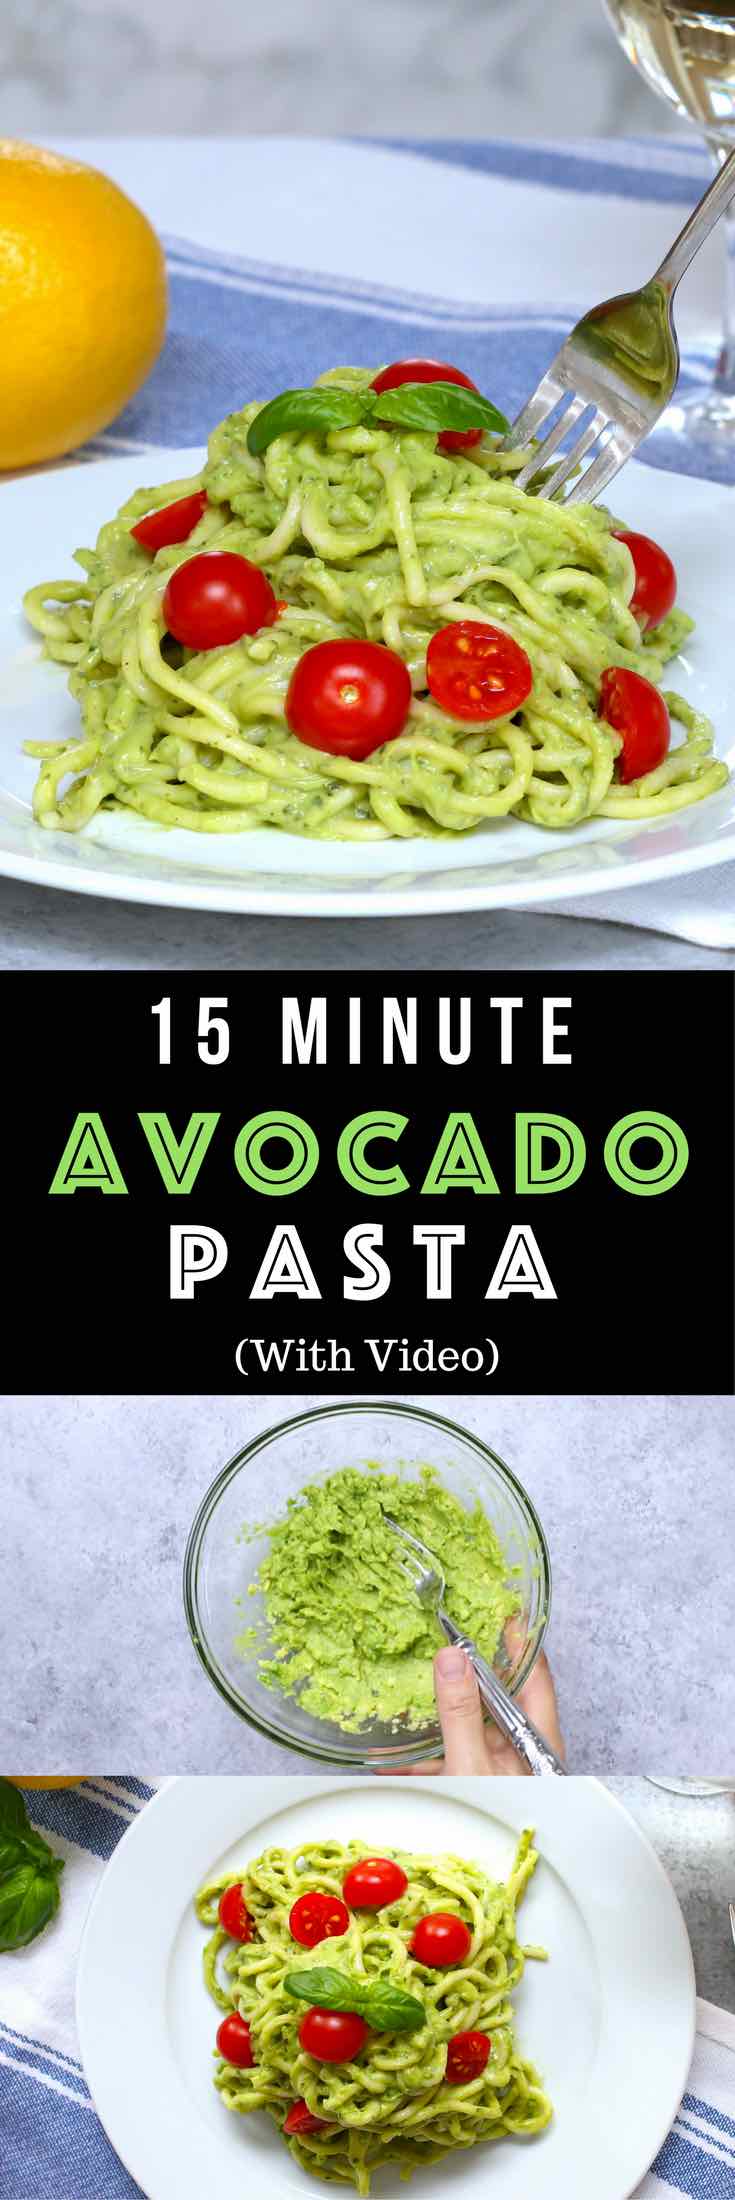 Easy, healthy, and on the table in about 15 minutes! Cream Avocado Pasta is the easiest and best avocado sauce pasta. All you need is a few simple ingredients: spaghetti, ripe avocados peeled and halved, fresh basil leaves, lemon, salt and pepper, olive oil and cherry tomatoes. Quick and easy lunch or dinner recipe. Eat without guilt. Vegetarian. Video recipe. | Tipbuzz.com